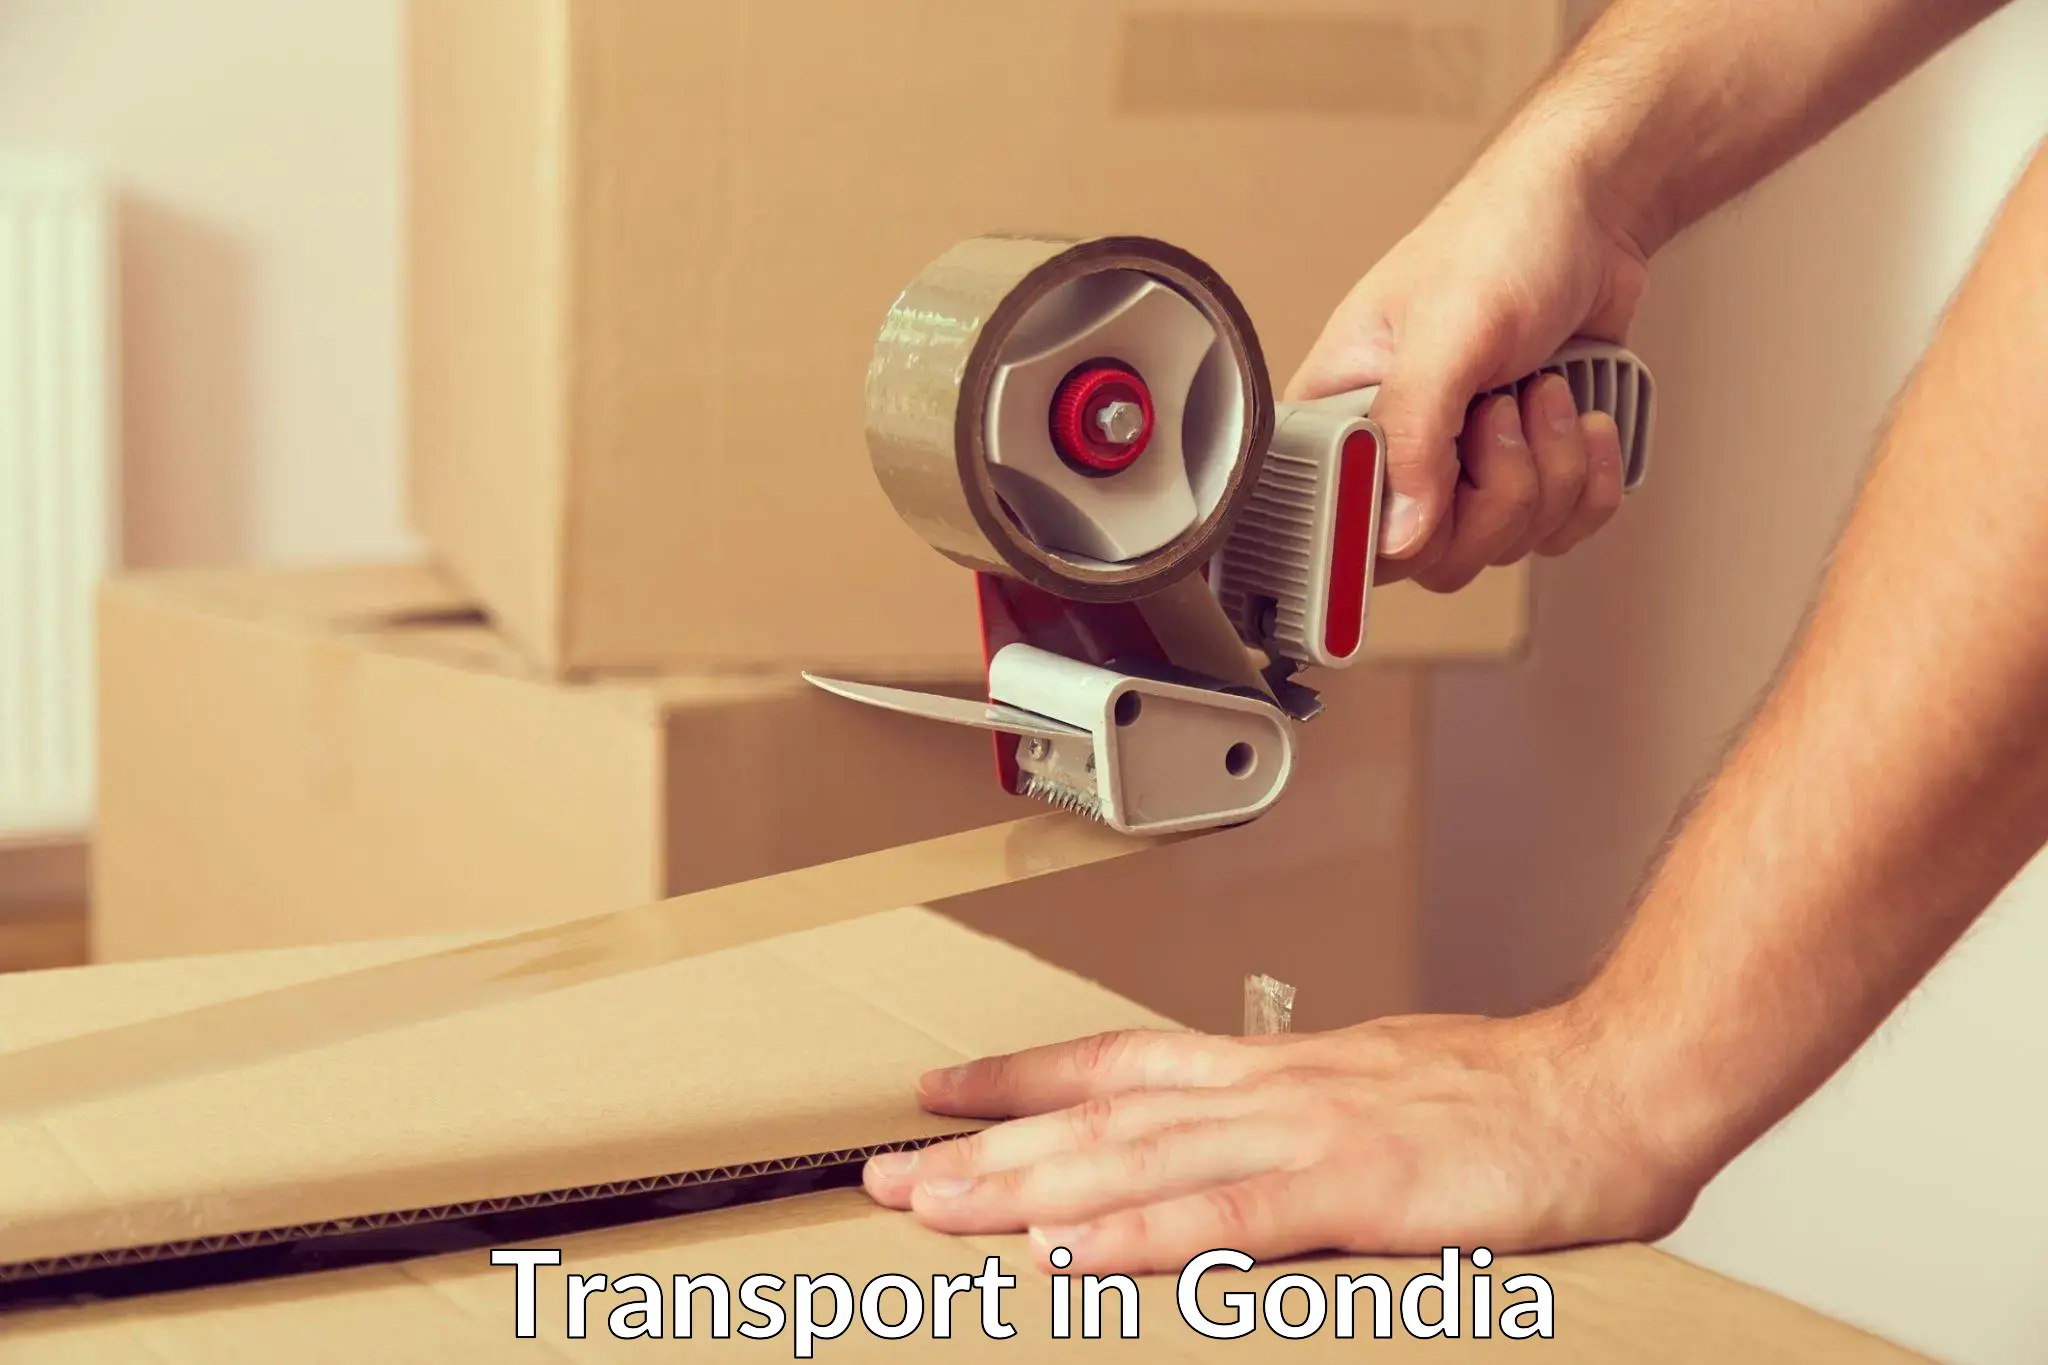 Container transportation services in Gondia